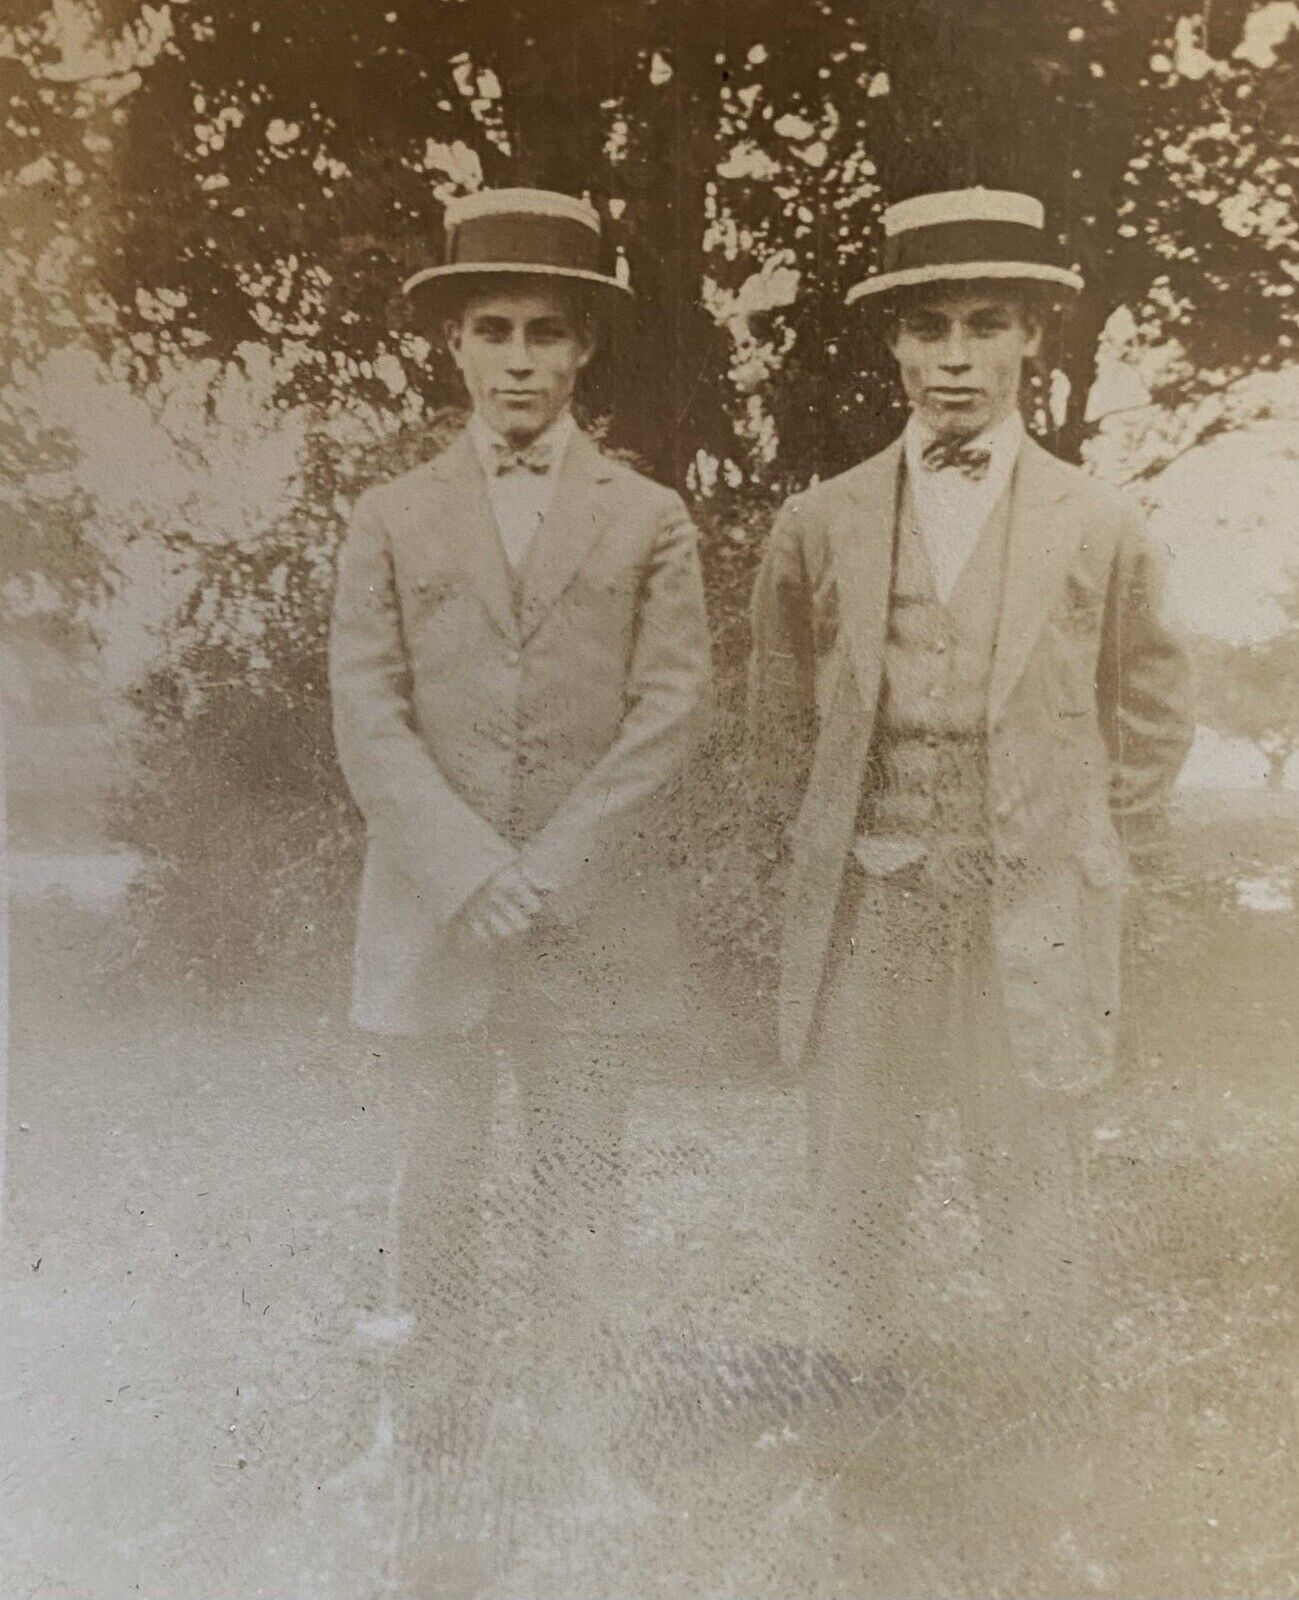 Twins 1925 Handsome Young Men in Suits & Boater Hats Small Antique Vintage Photo